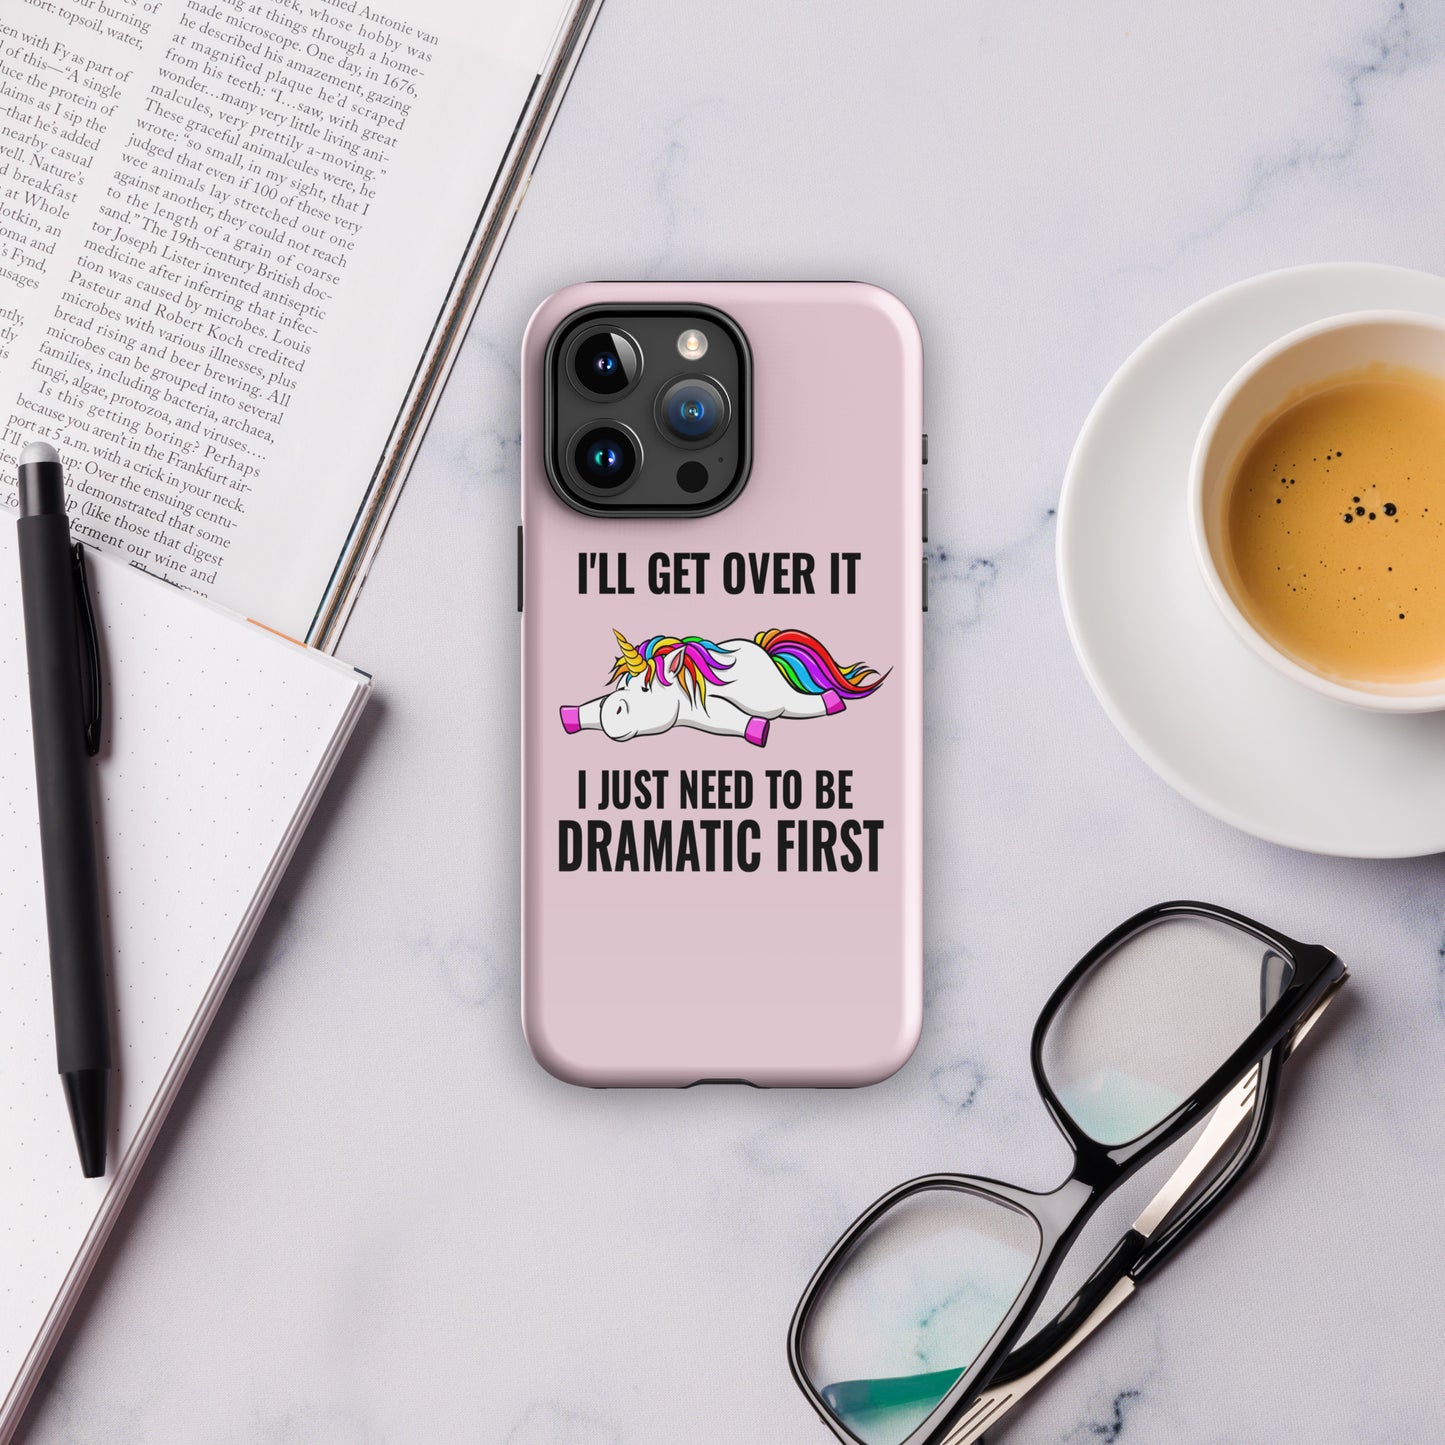 I'll Get Over It, I Just Need to be Dramatic First: Whimsical Unicorn Case for iPhone®